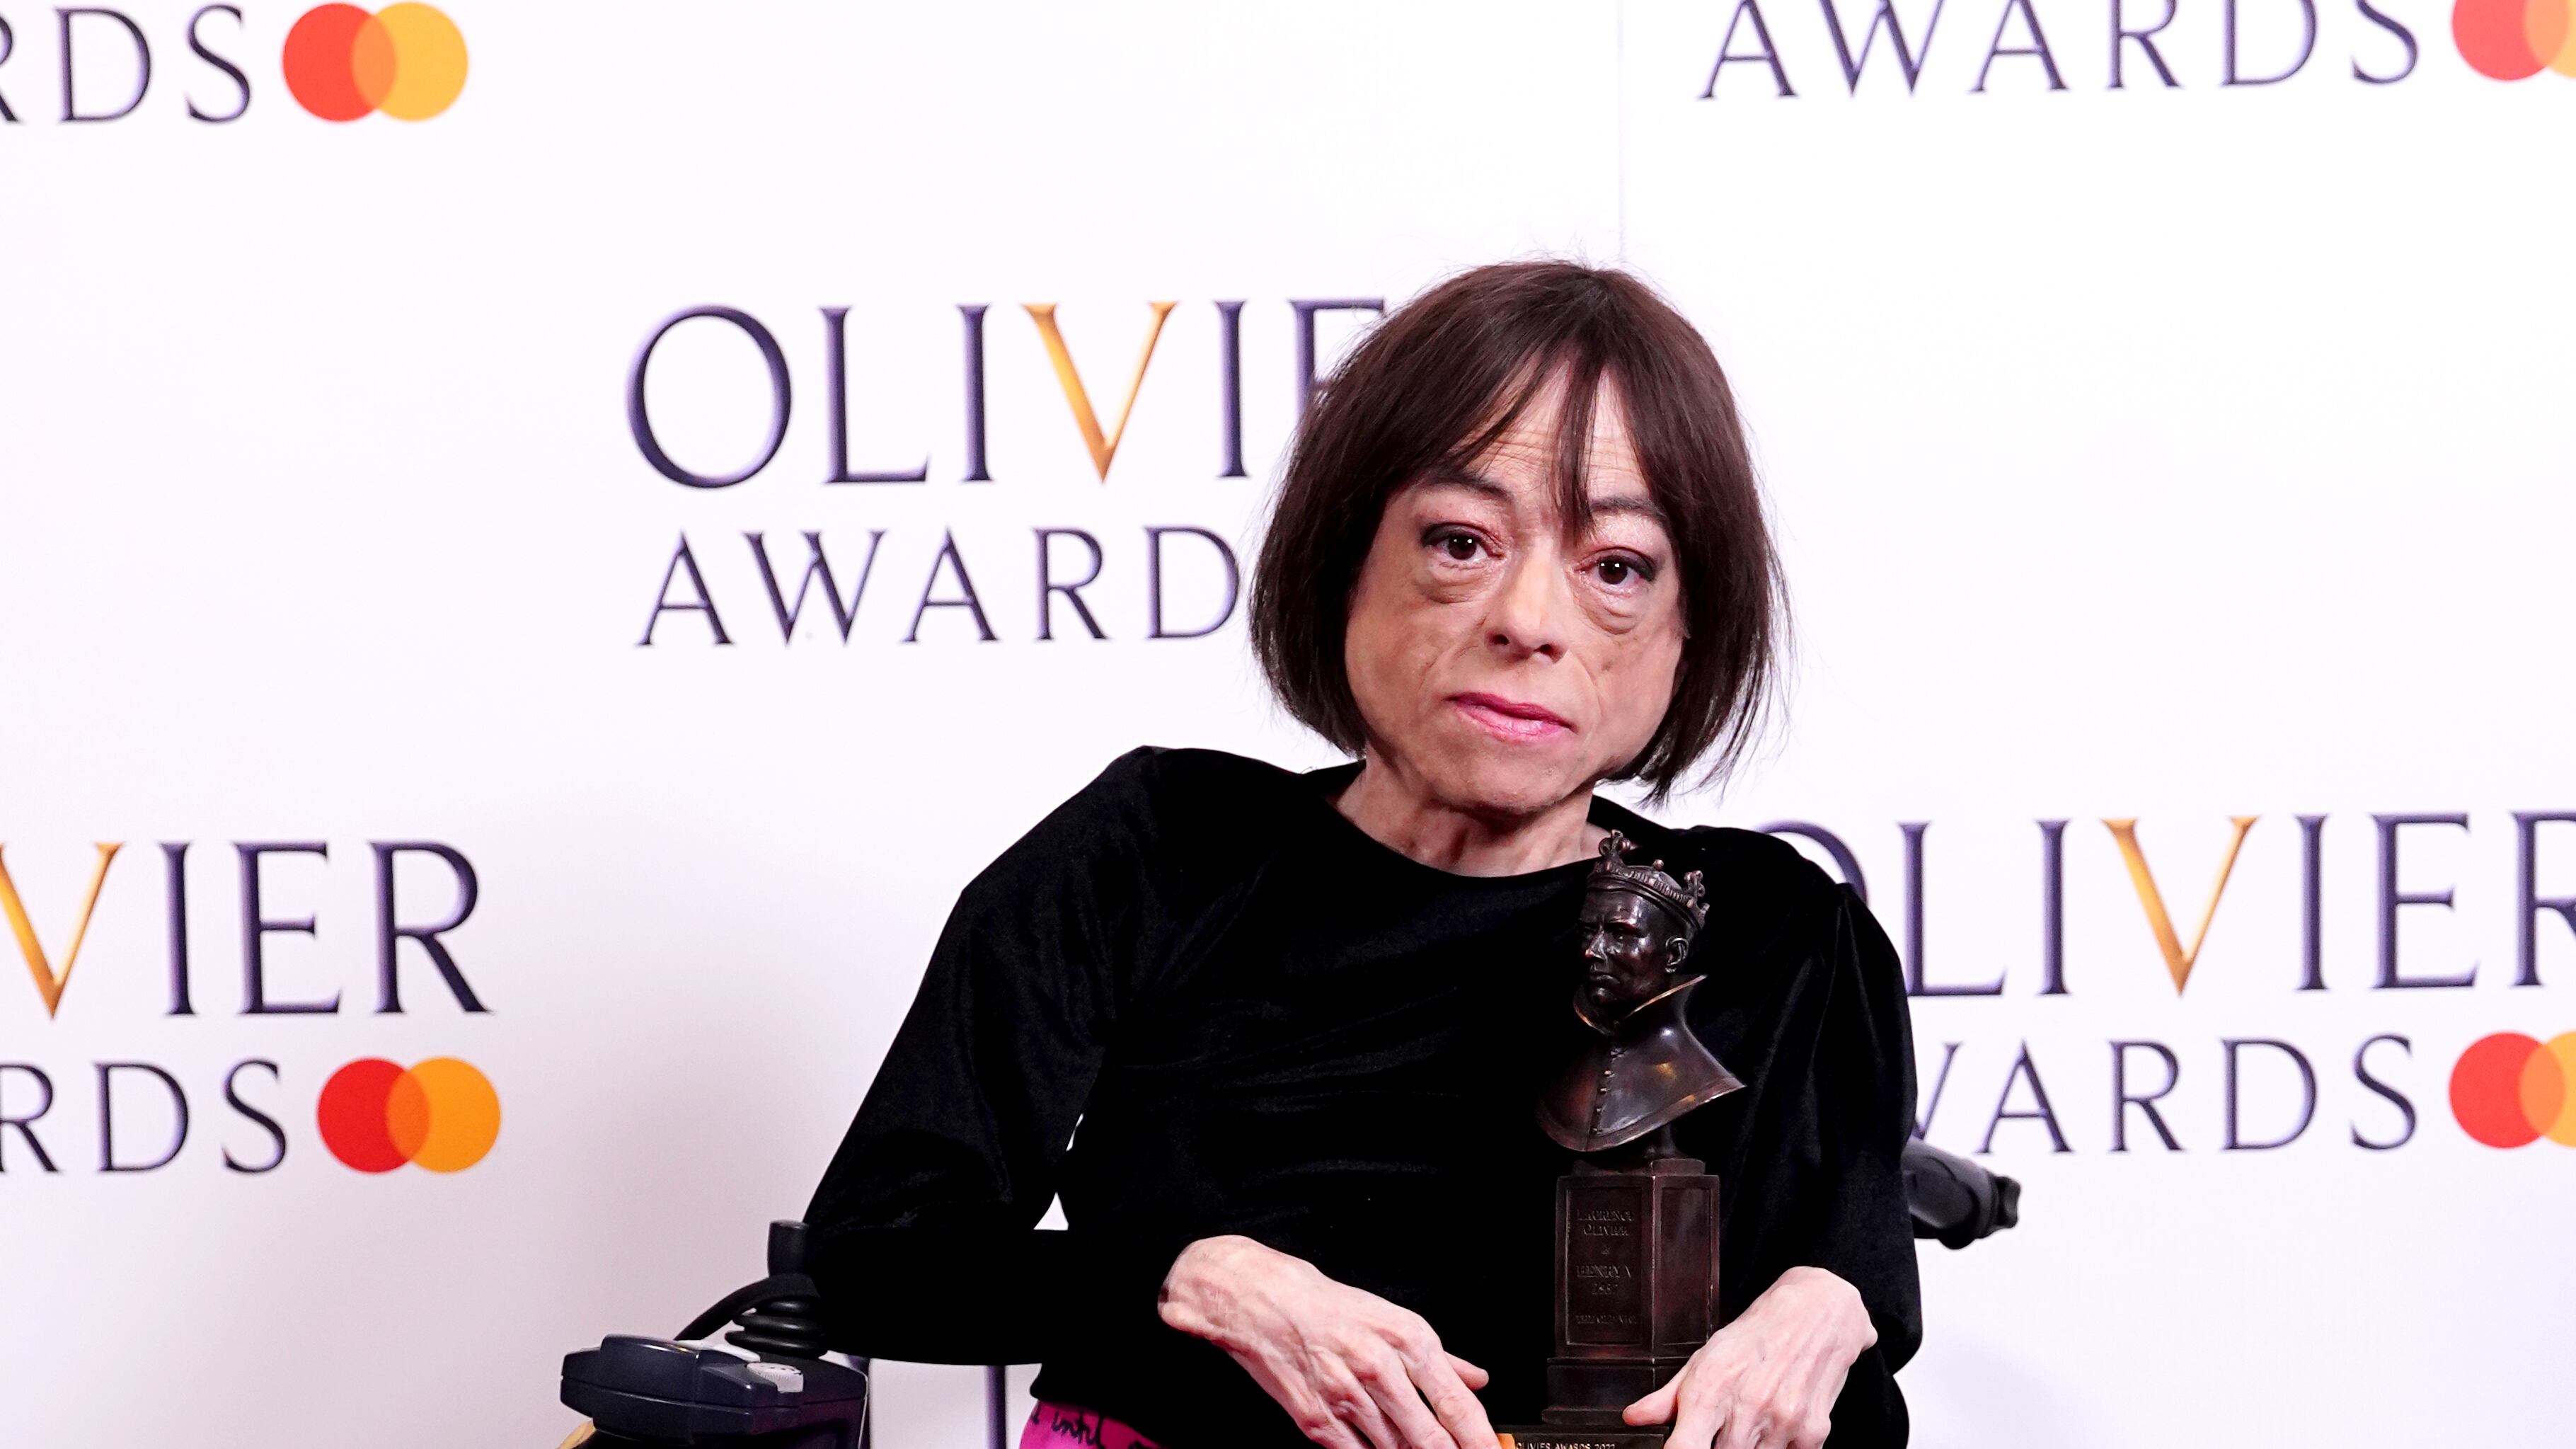 Actress Liz Carr says it hurts to hear her younger self say ‘I’d rather be dead’